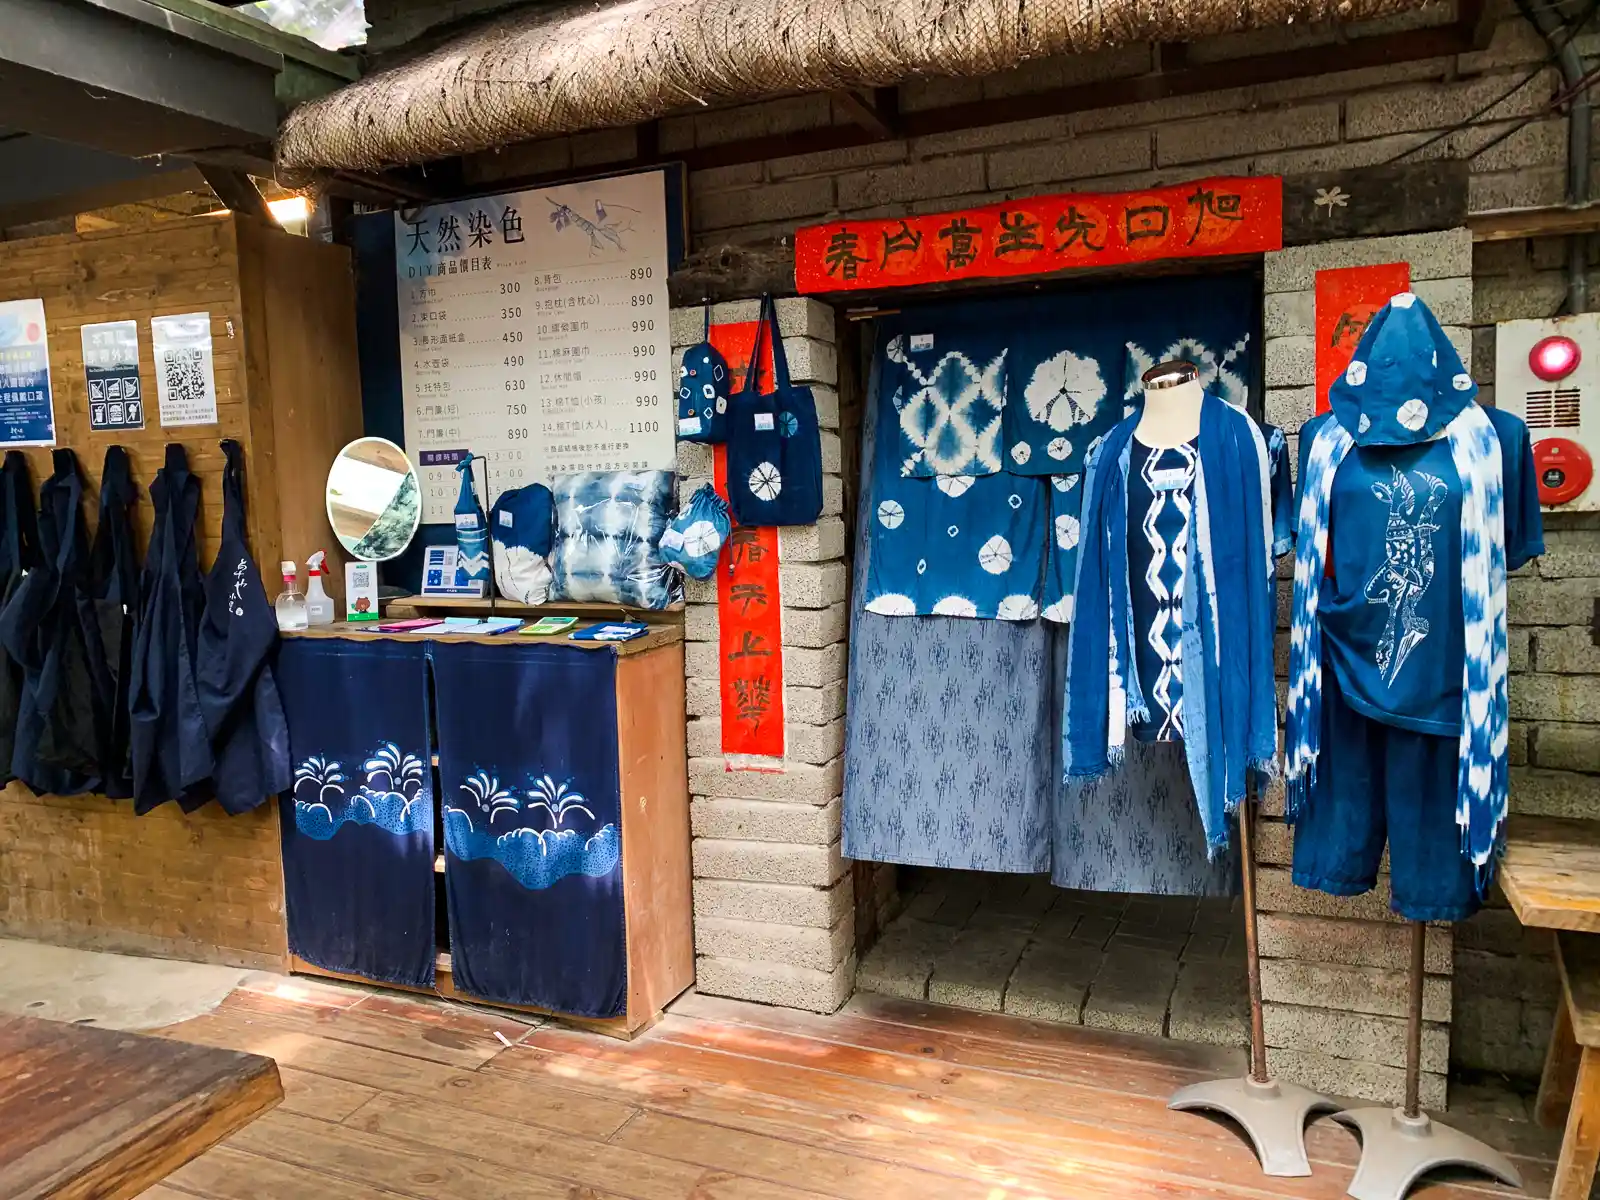 A display of clothing and other indigo-dyed textiles.